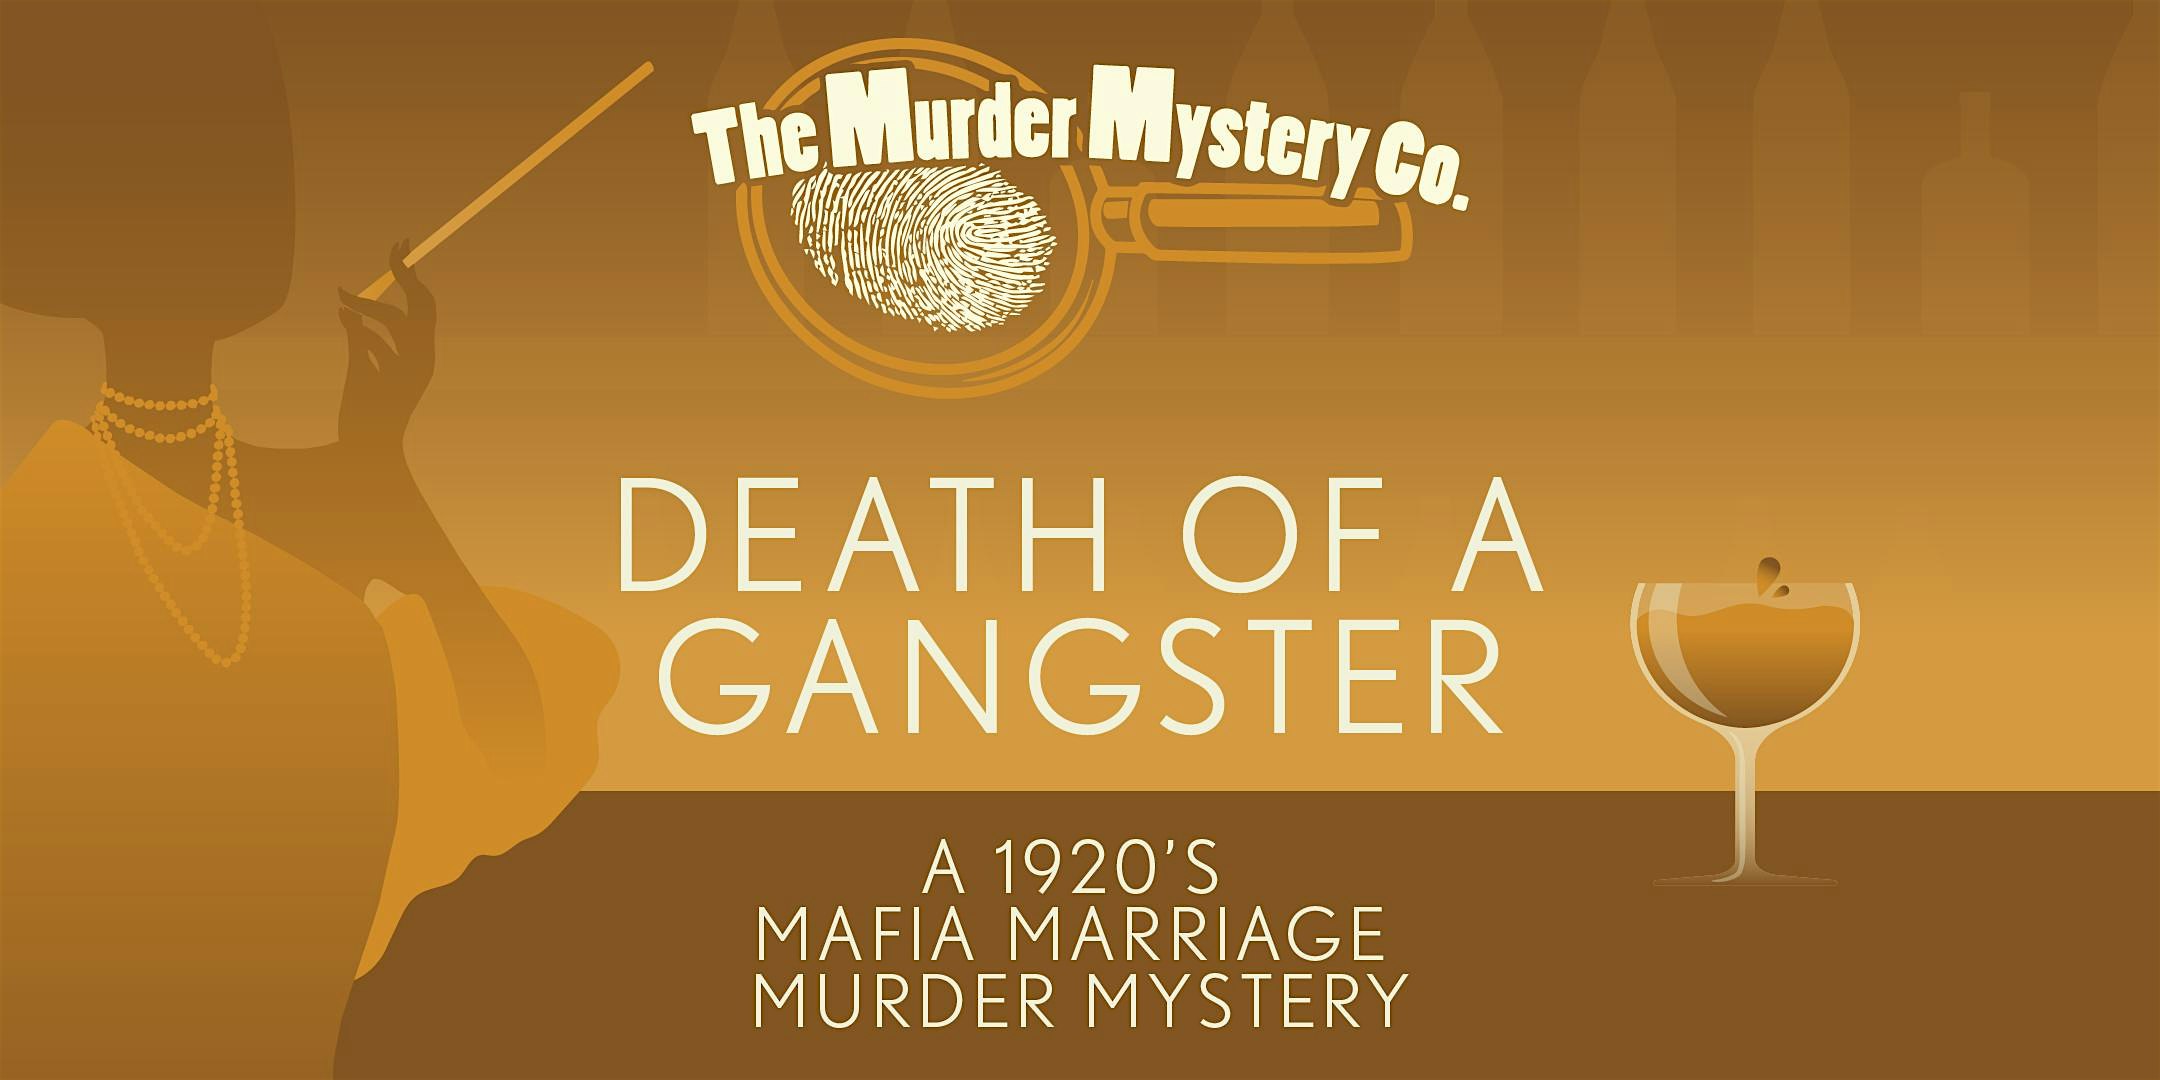 Murder Mystery Dinner Theater Show in Atlanta/Midtown: Death of a Gangster